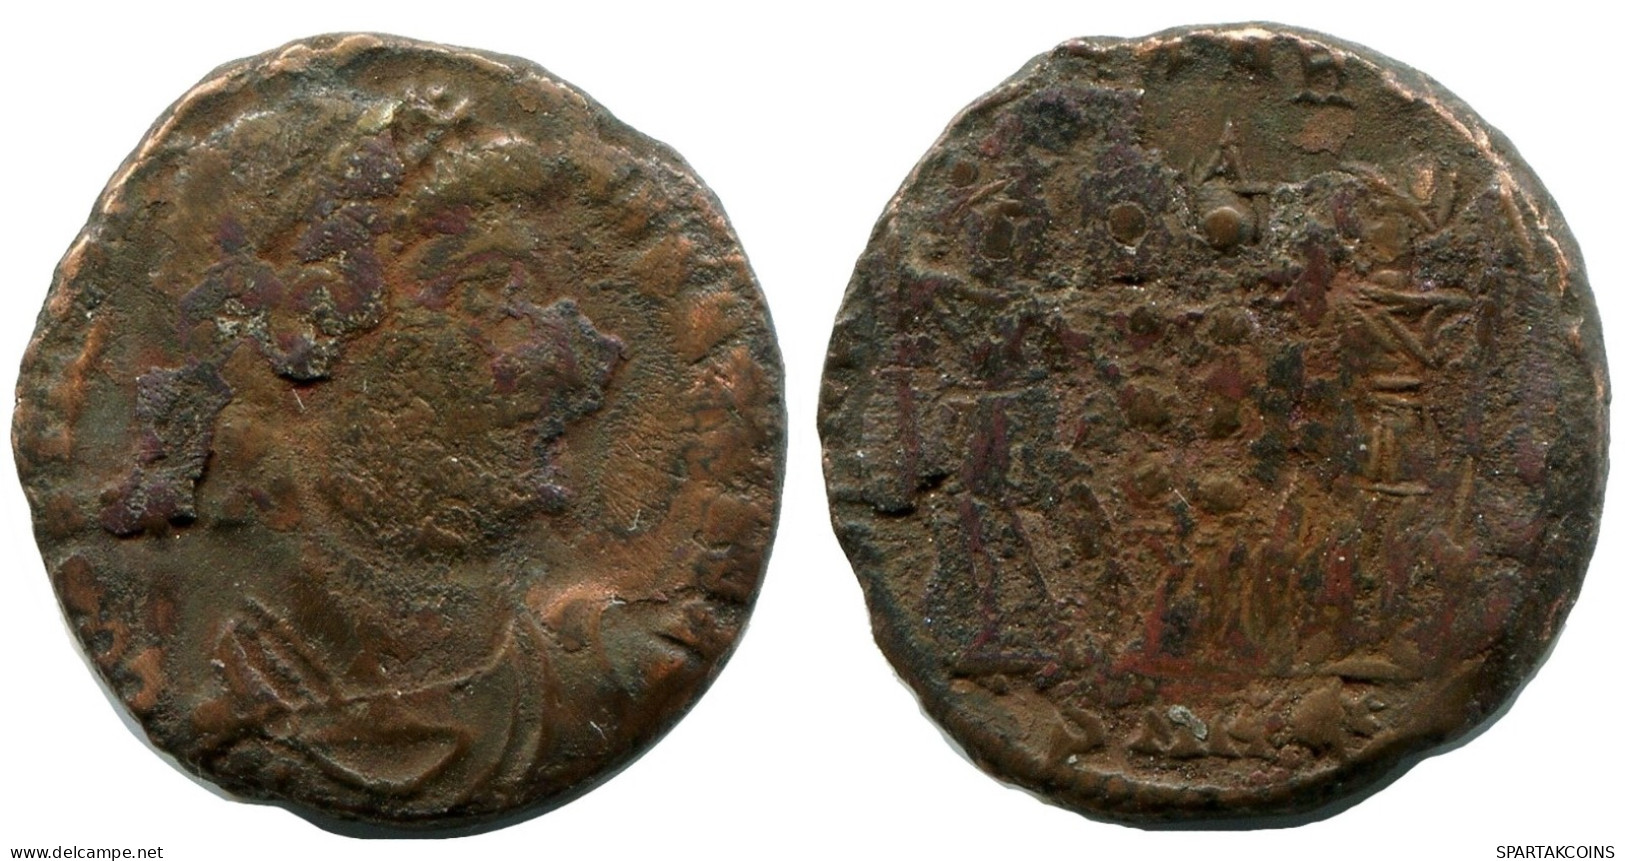 CONSTANTINE I MINTED IN HERACLEA FOUND IN IHNASYAH HOARD EGYPT #ANC11198.14.D.A - The Christian Empire (307 AD Tot 363 AD)